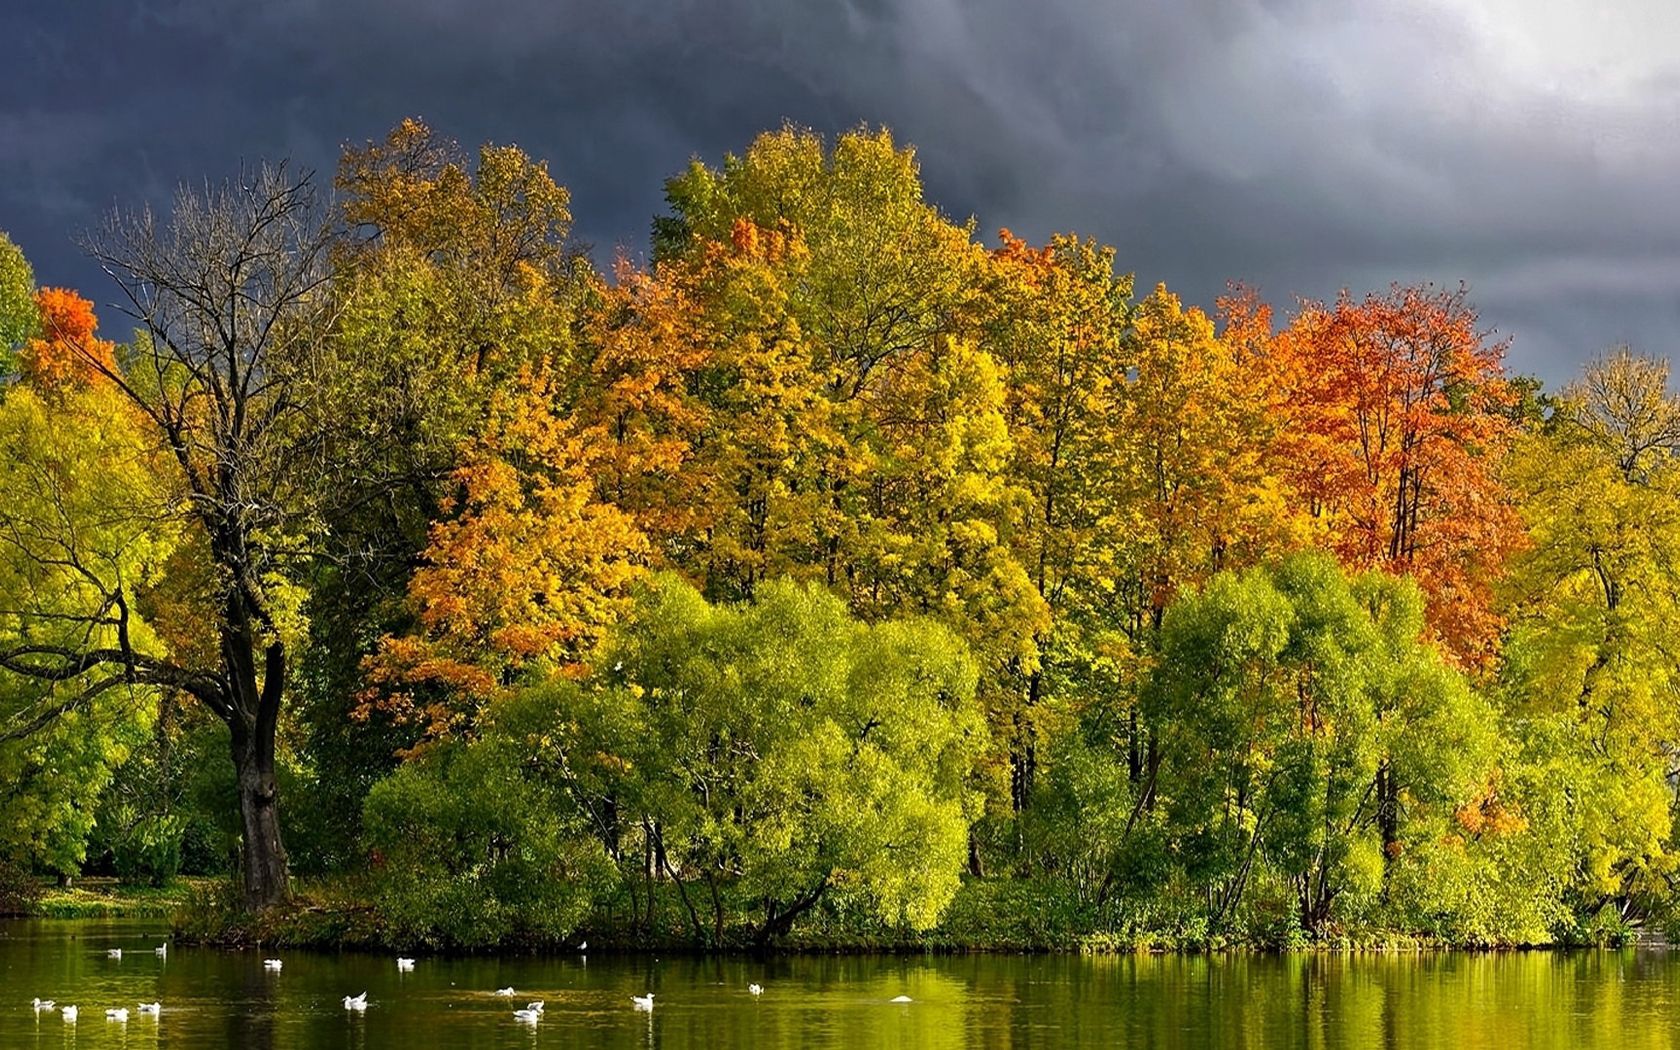 trees, nature, ducks, autumn, clouds, lake, shore, bank, mainly cloudy, overcast